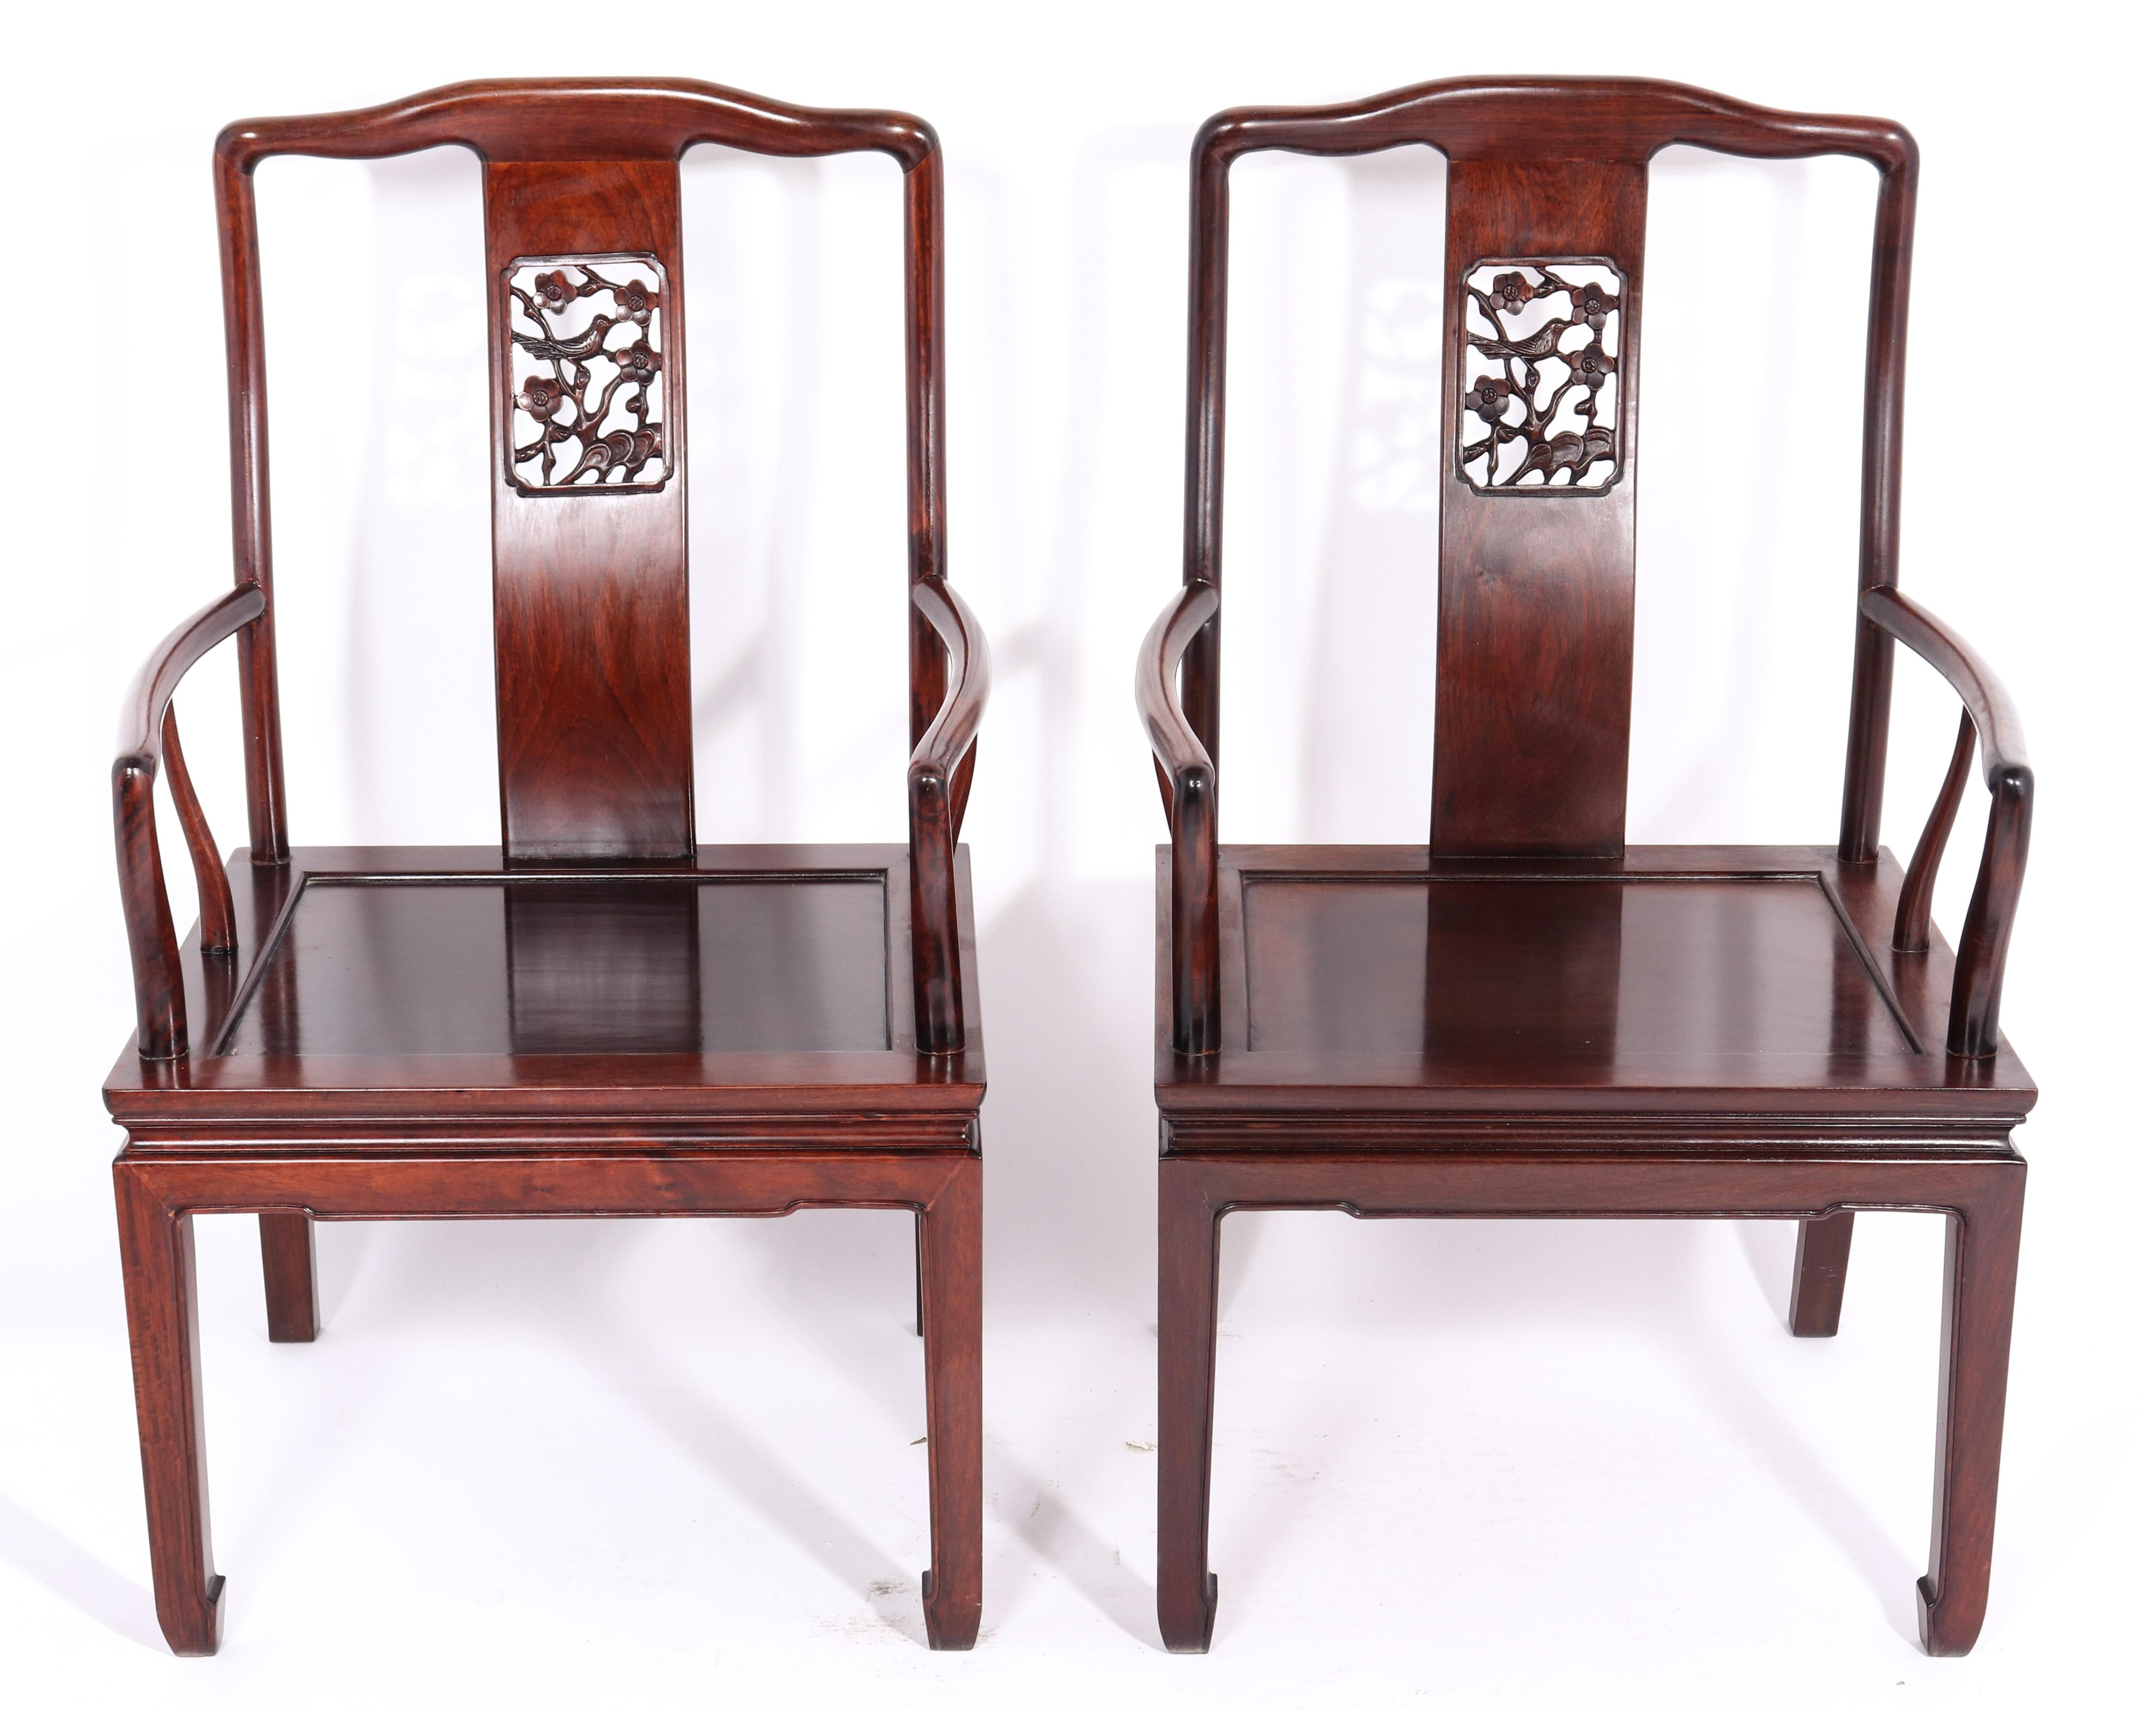 Pair of Chinese armchairs made in huanghuali hardwood. The pair has hand carved back plates with a bird sitting among flowers and decorative foliage. In great vintage condition with age-appropriate wear and use.